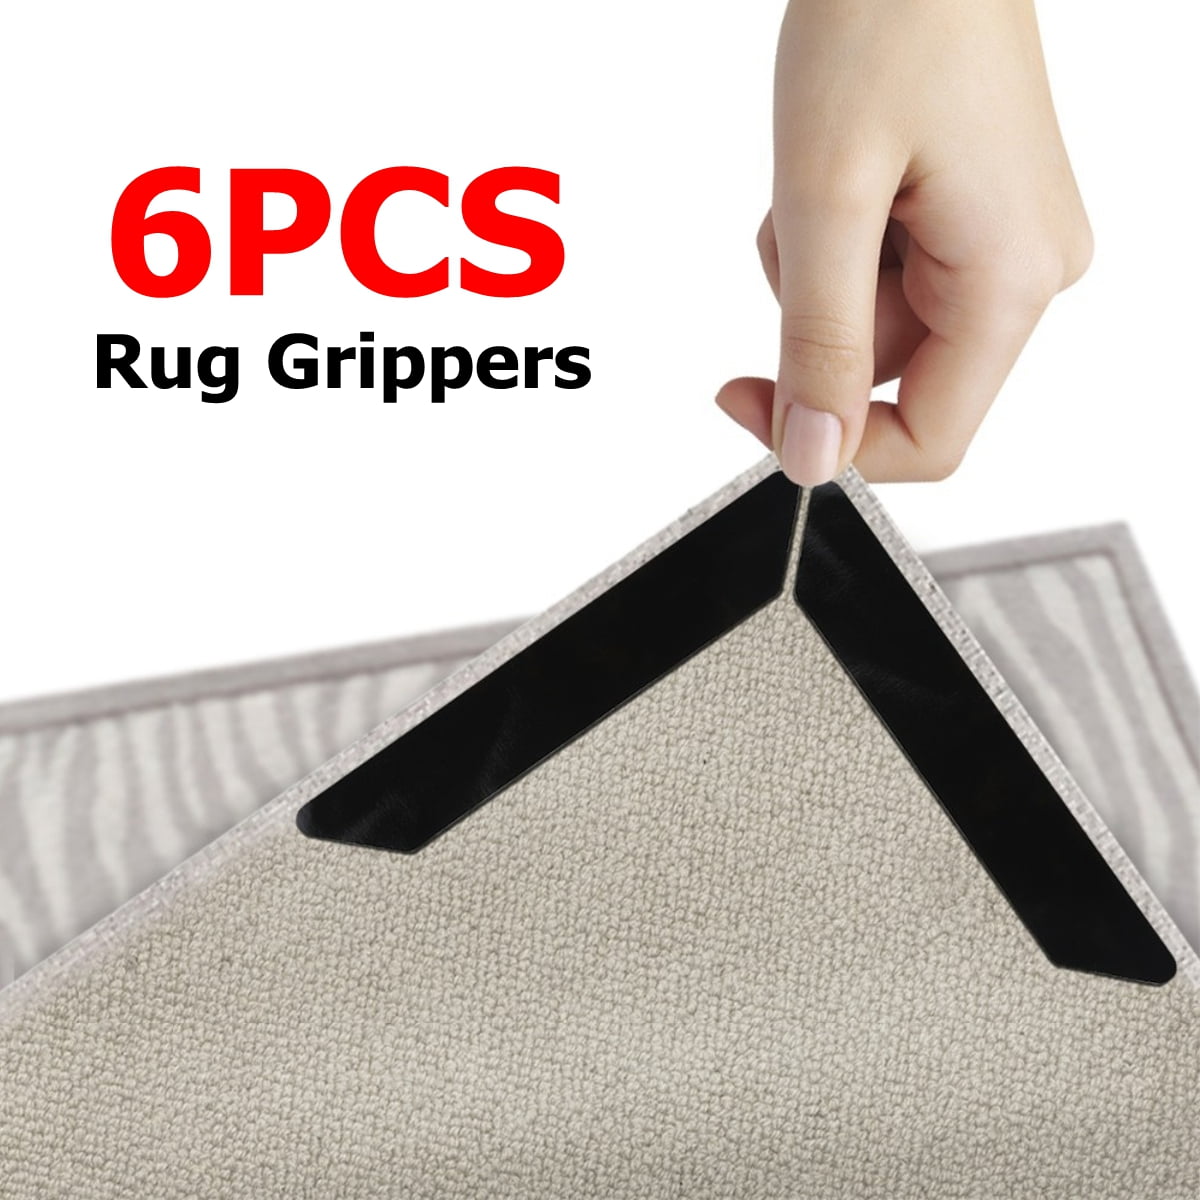 Anti Slip Rug Pad For Rugs Without, How To Keep Rugs In Place On Carpet